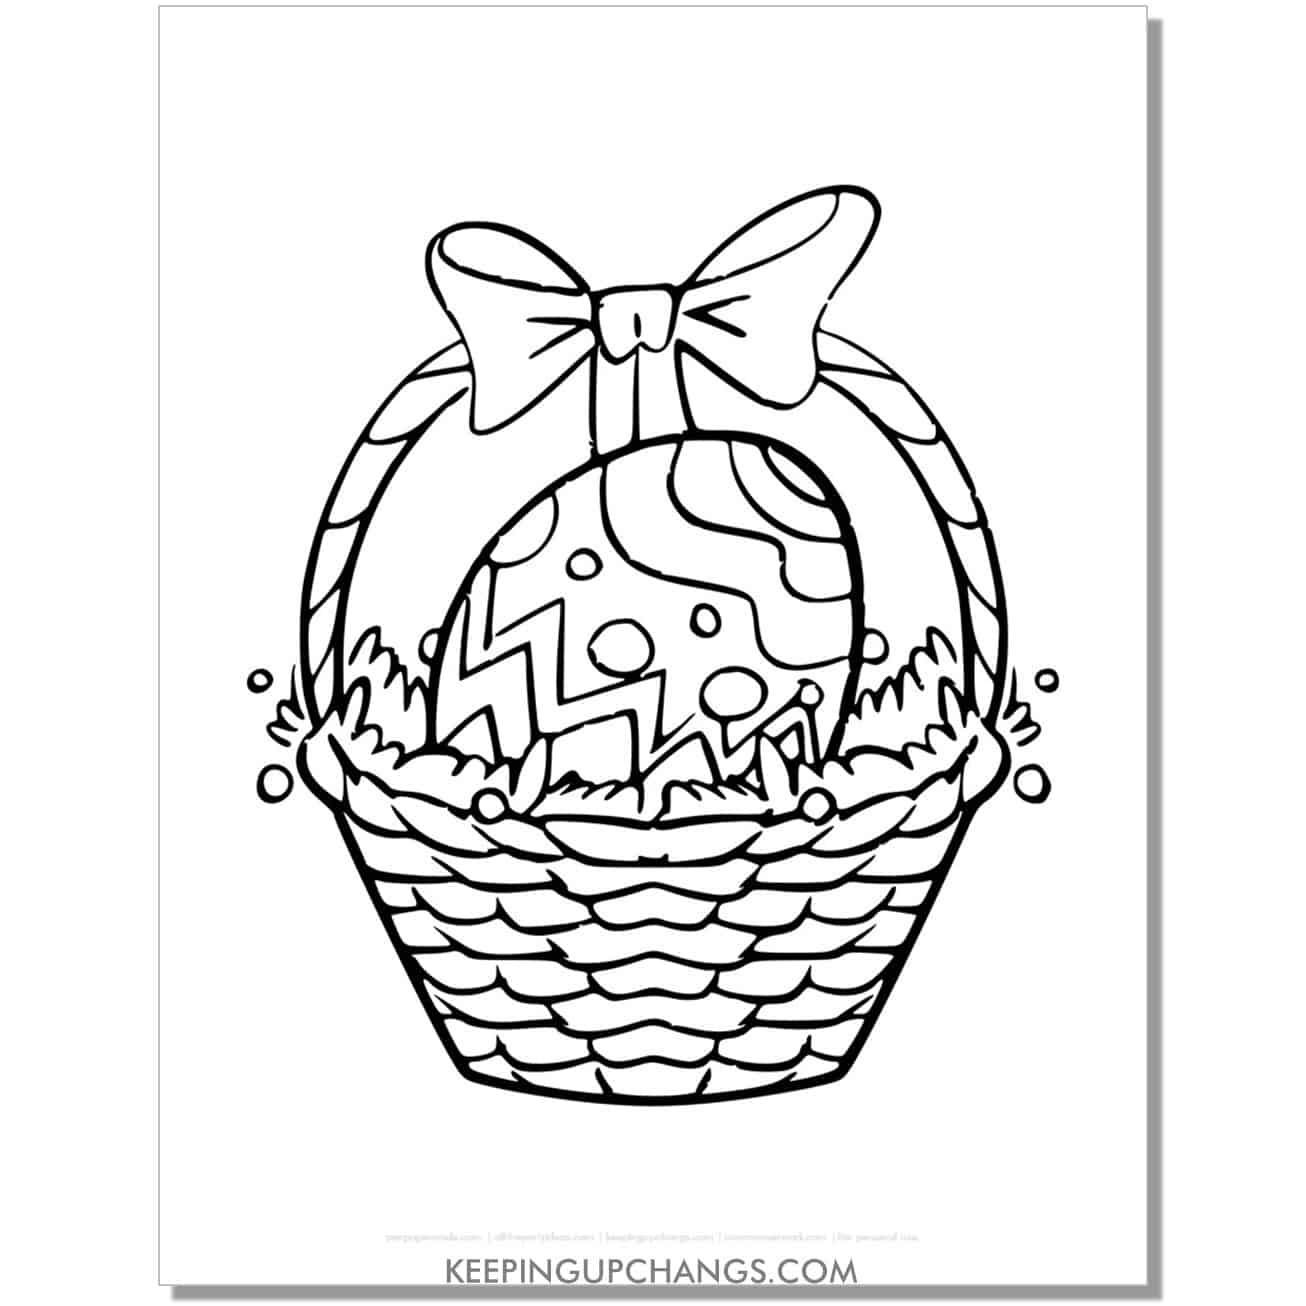 drawing of Easter basket with one large egg coloring page, sheet.